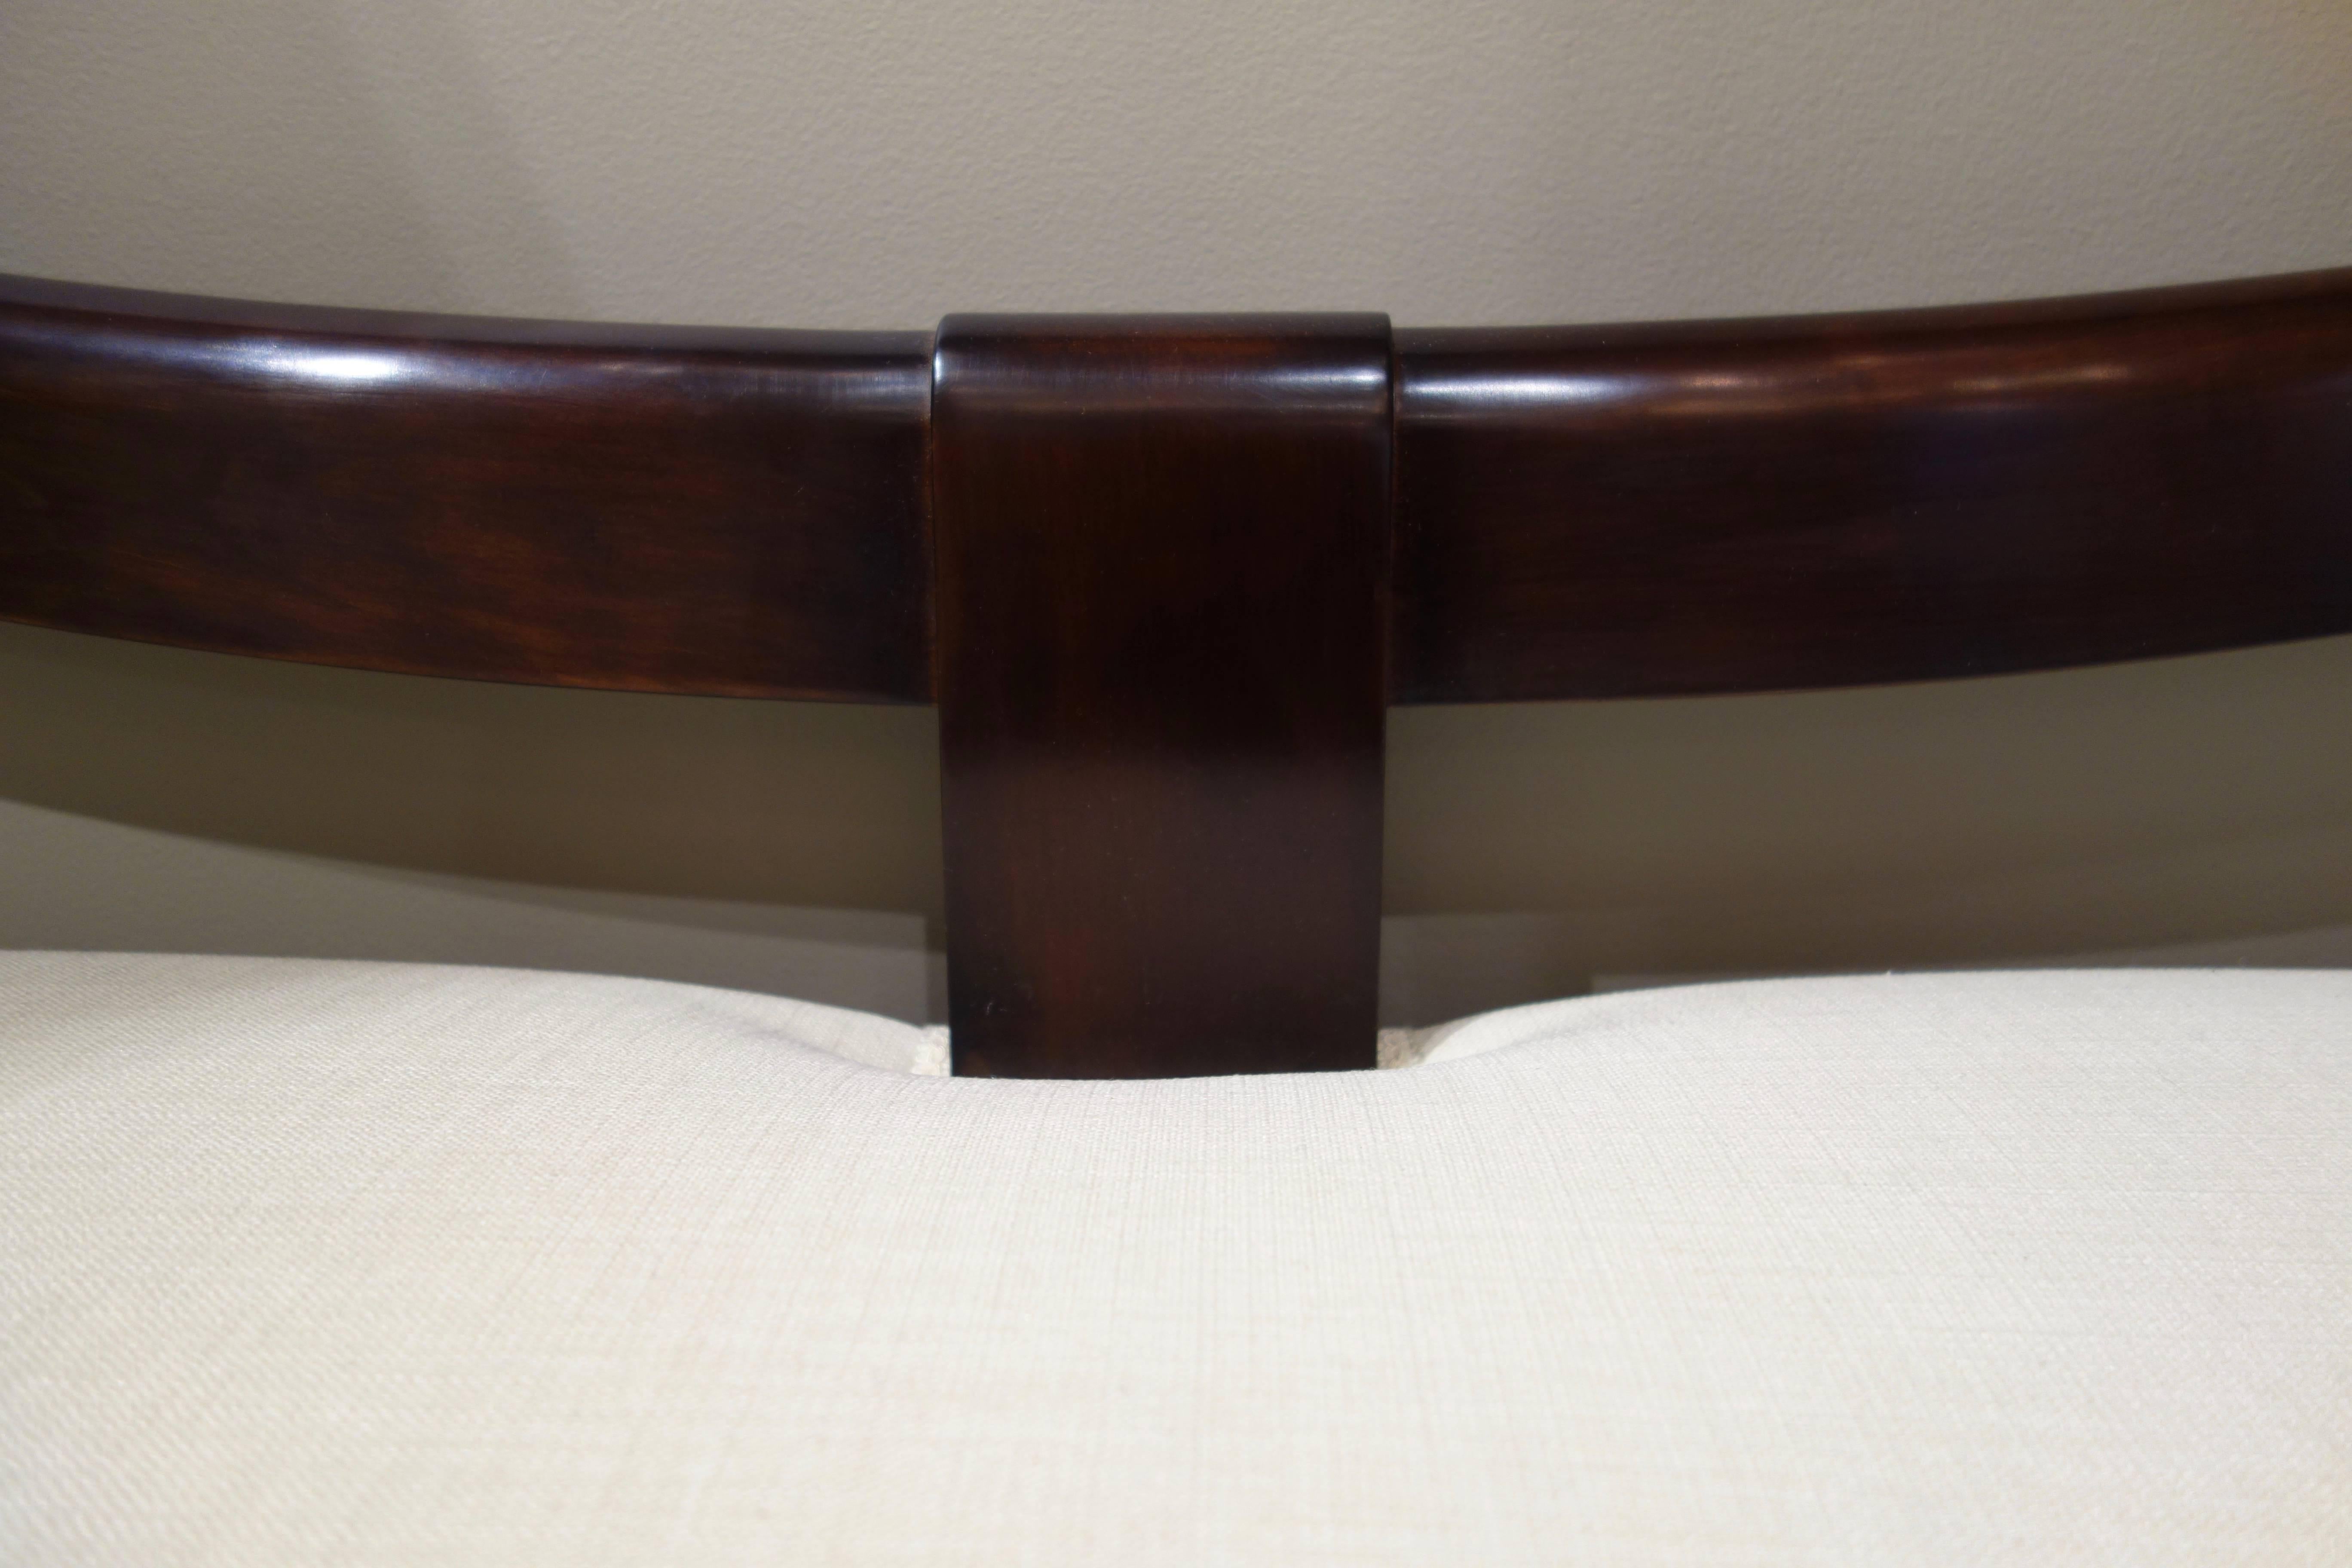 An Italian long bench or settee by Emilio Lancia, the Italian architect and designer who was in partnership with Gio Ponti from 1923-1933. The bench of dark brown mahogany features a curved back with centre stretcher, the open arms extending to form